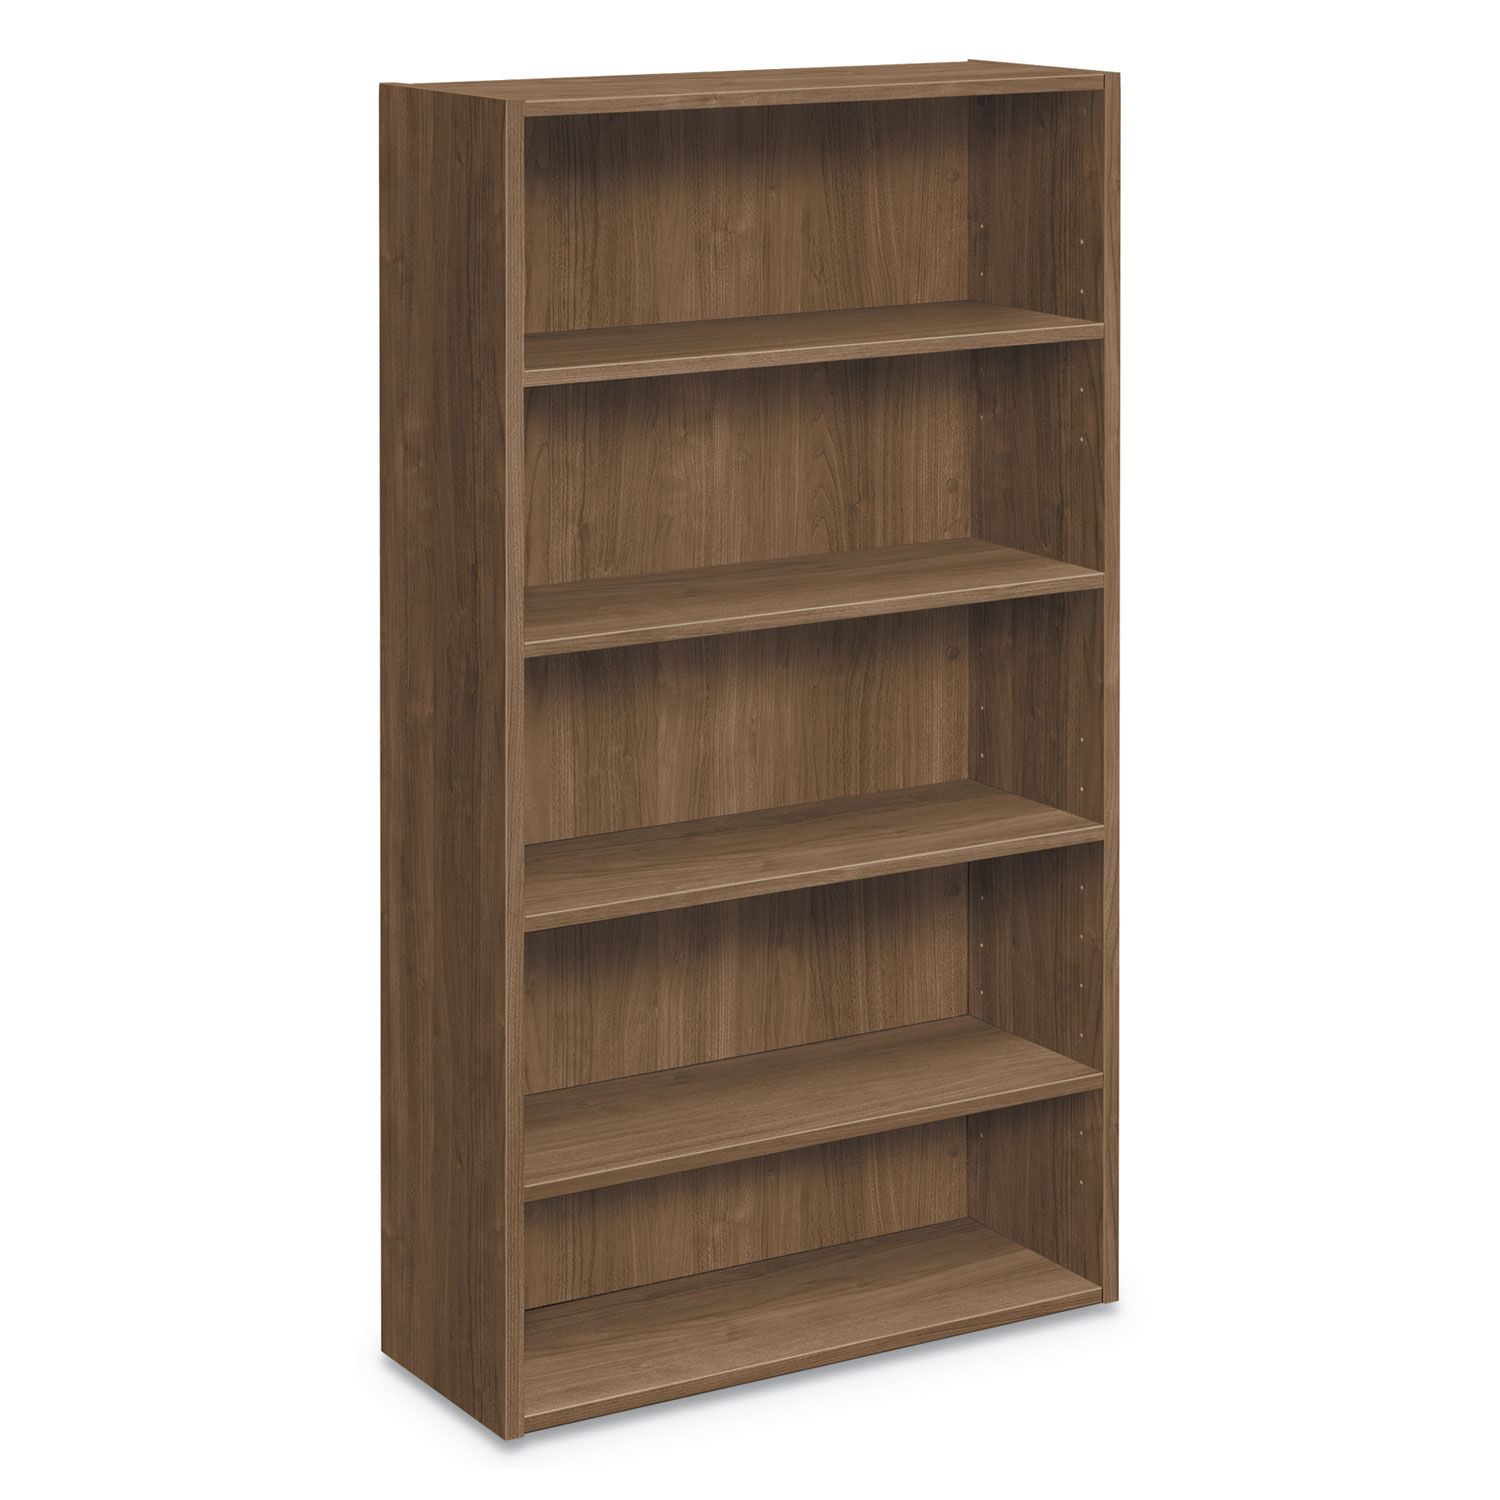 Foundation Bookcases 32.06w x 13.81d x 65.38h, Pinnacle